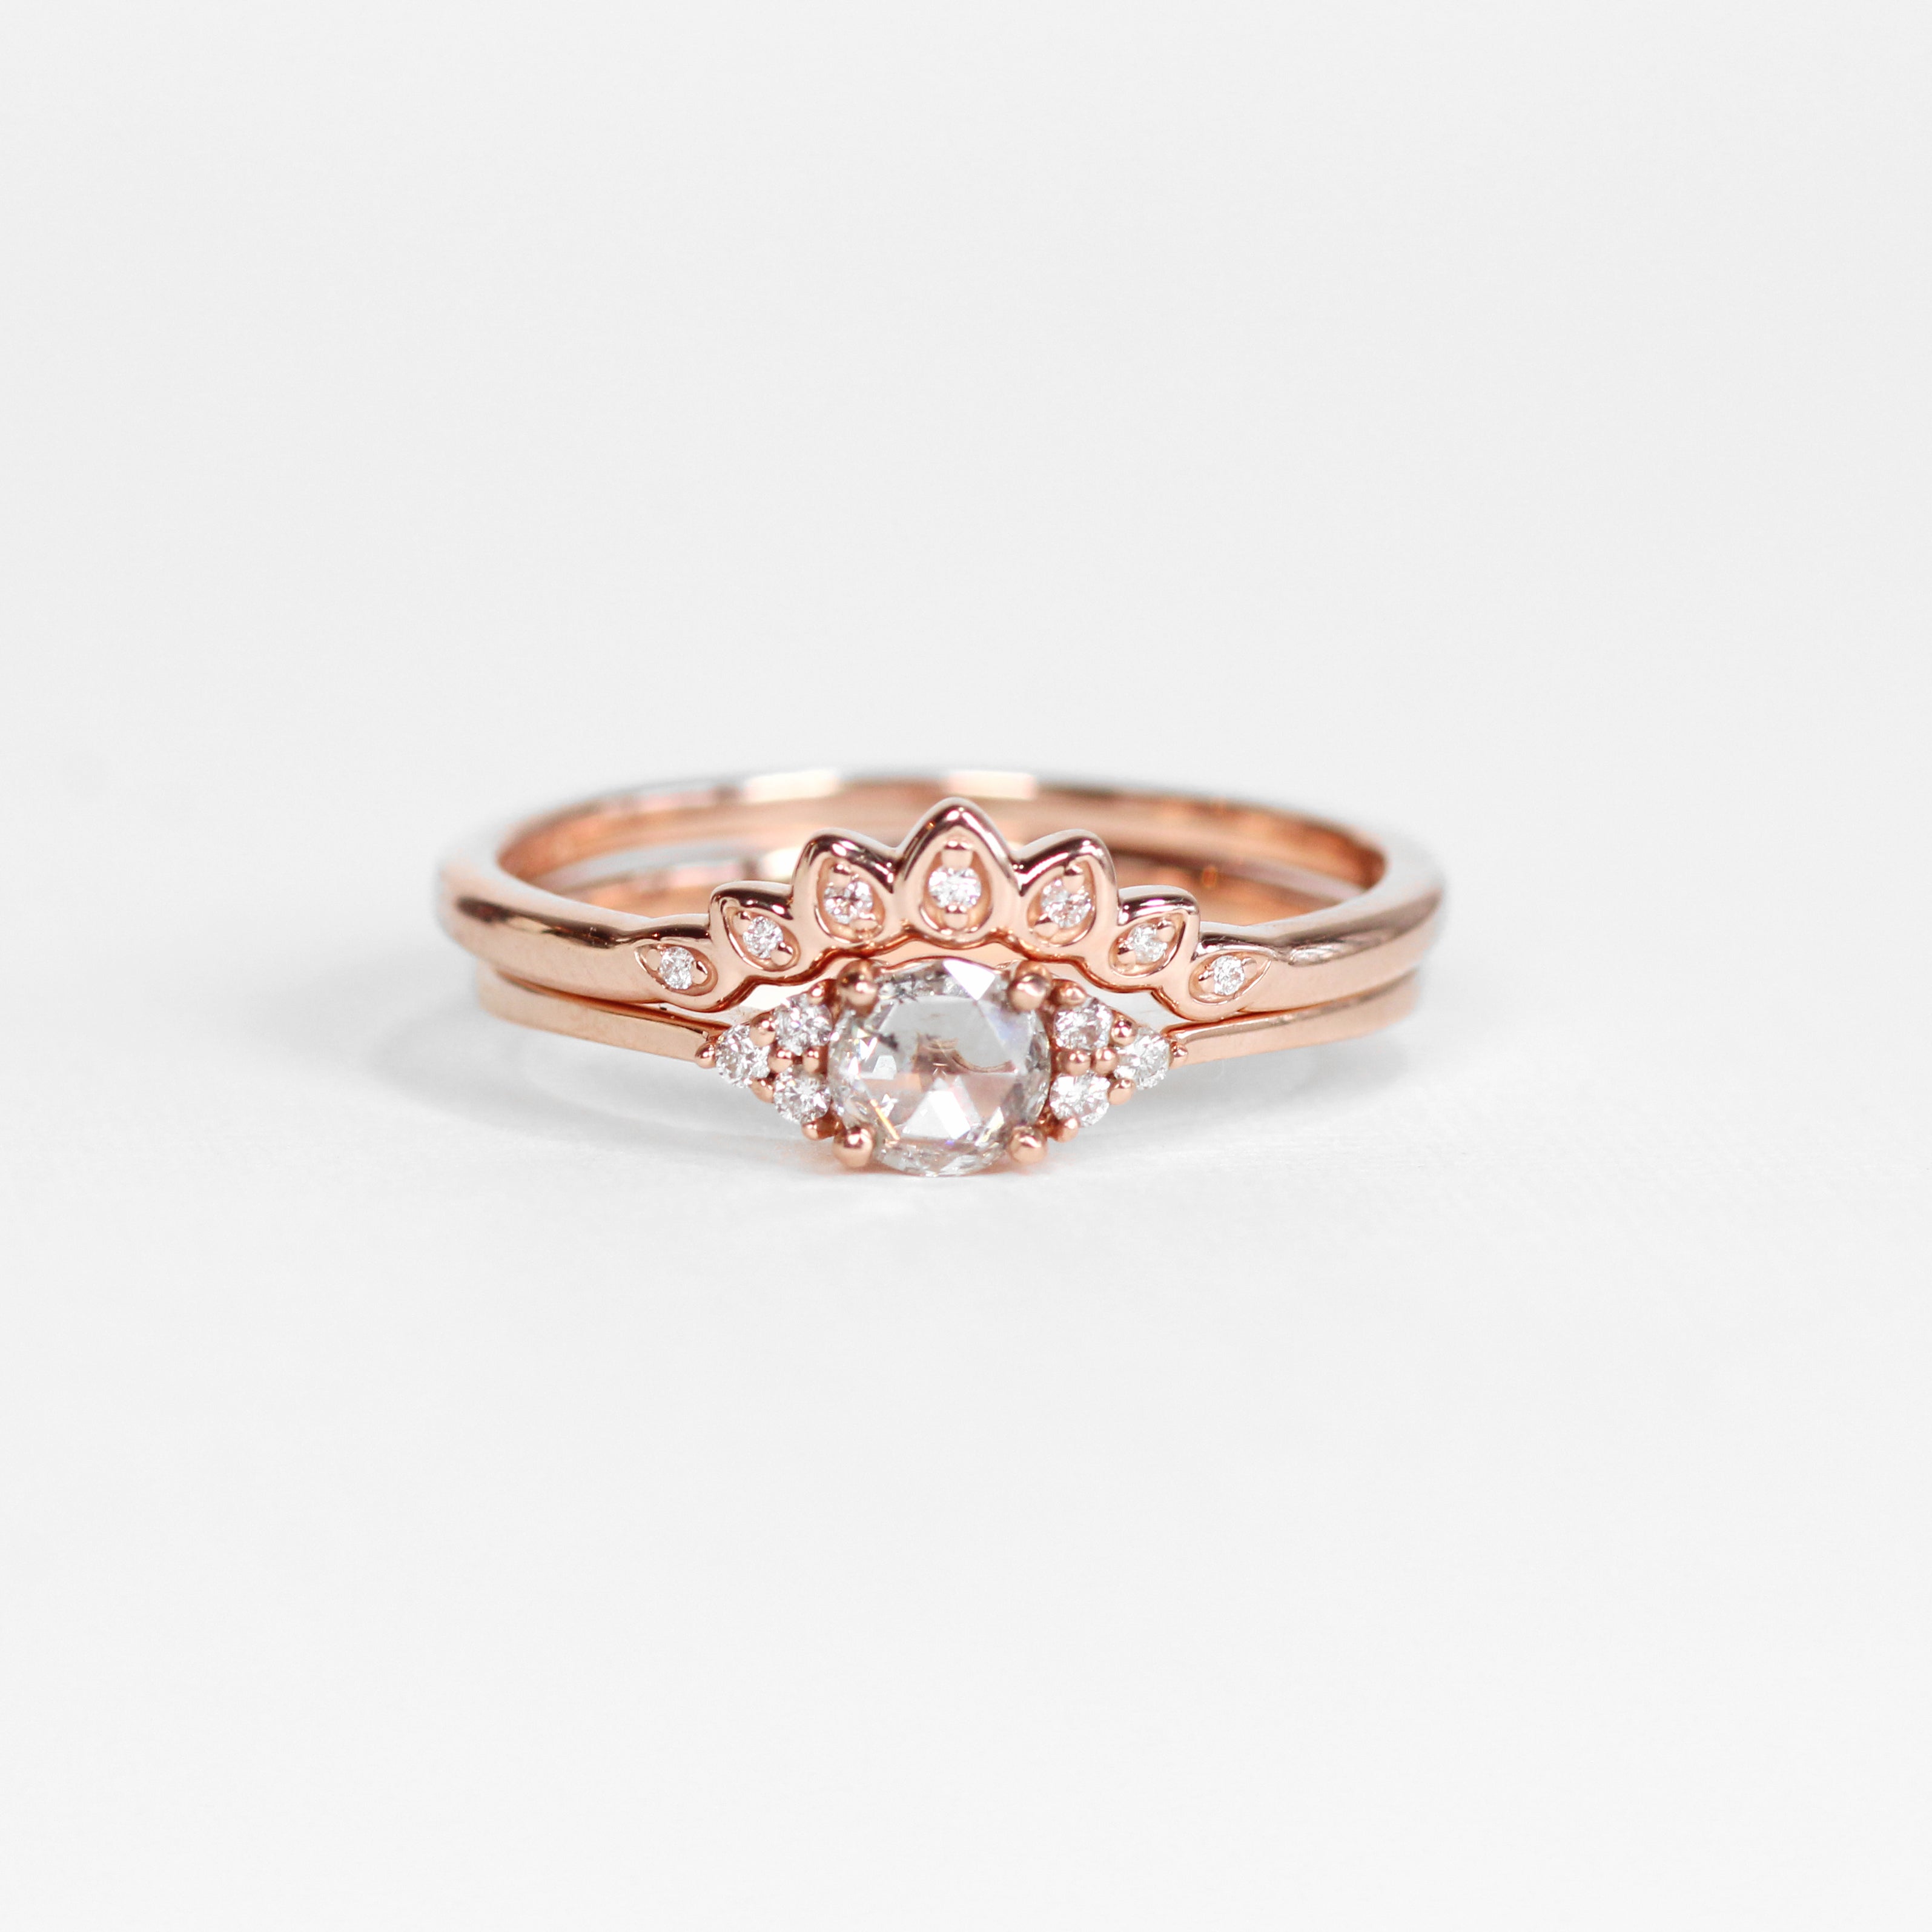 Fauna - Curved antique style diamond band - Midwinter Co. Alternative Bridal Rings and Modern Fine Jewelry